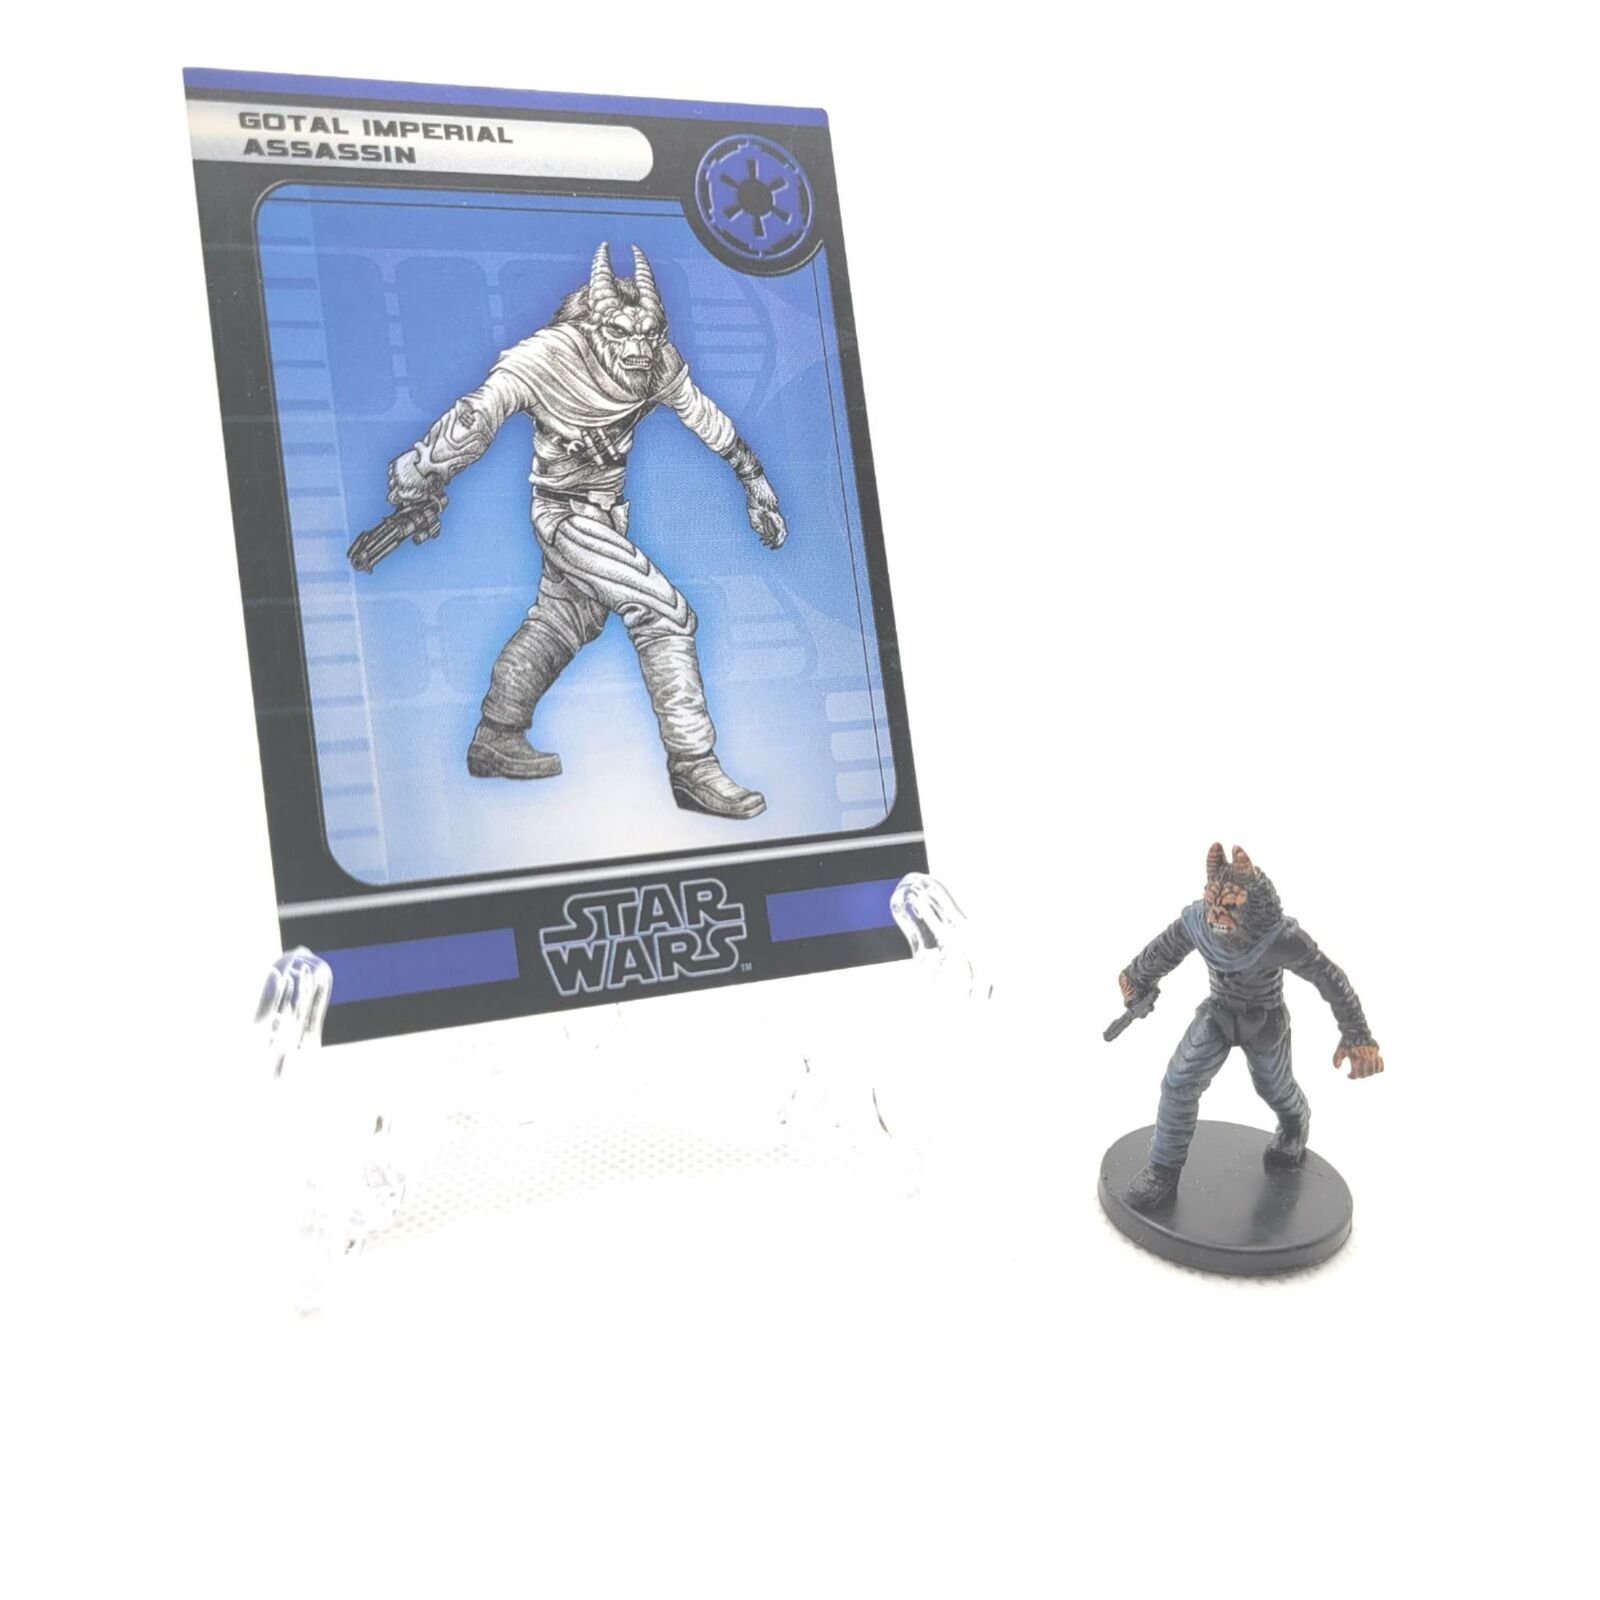 Star Wars Miniatures Gotal Imperial Assassin W/card 36/60 Wotc Common Empire